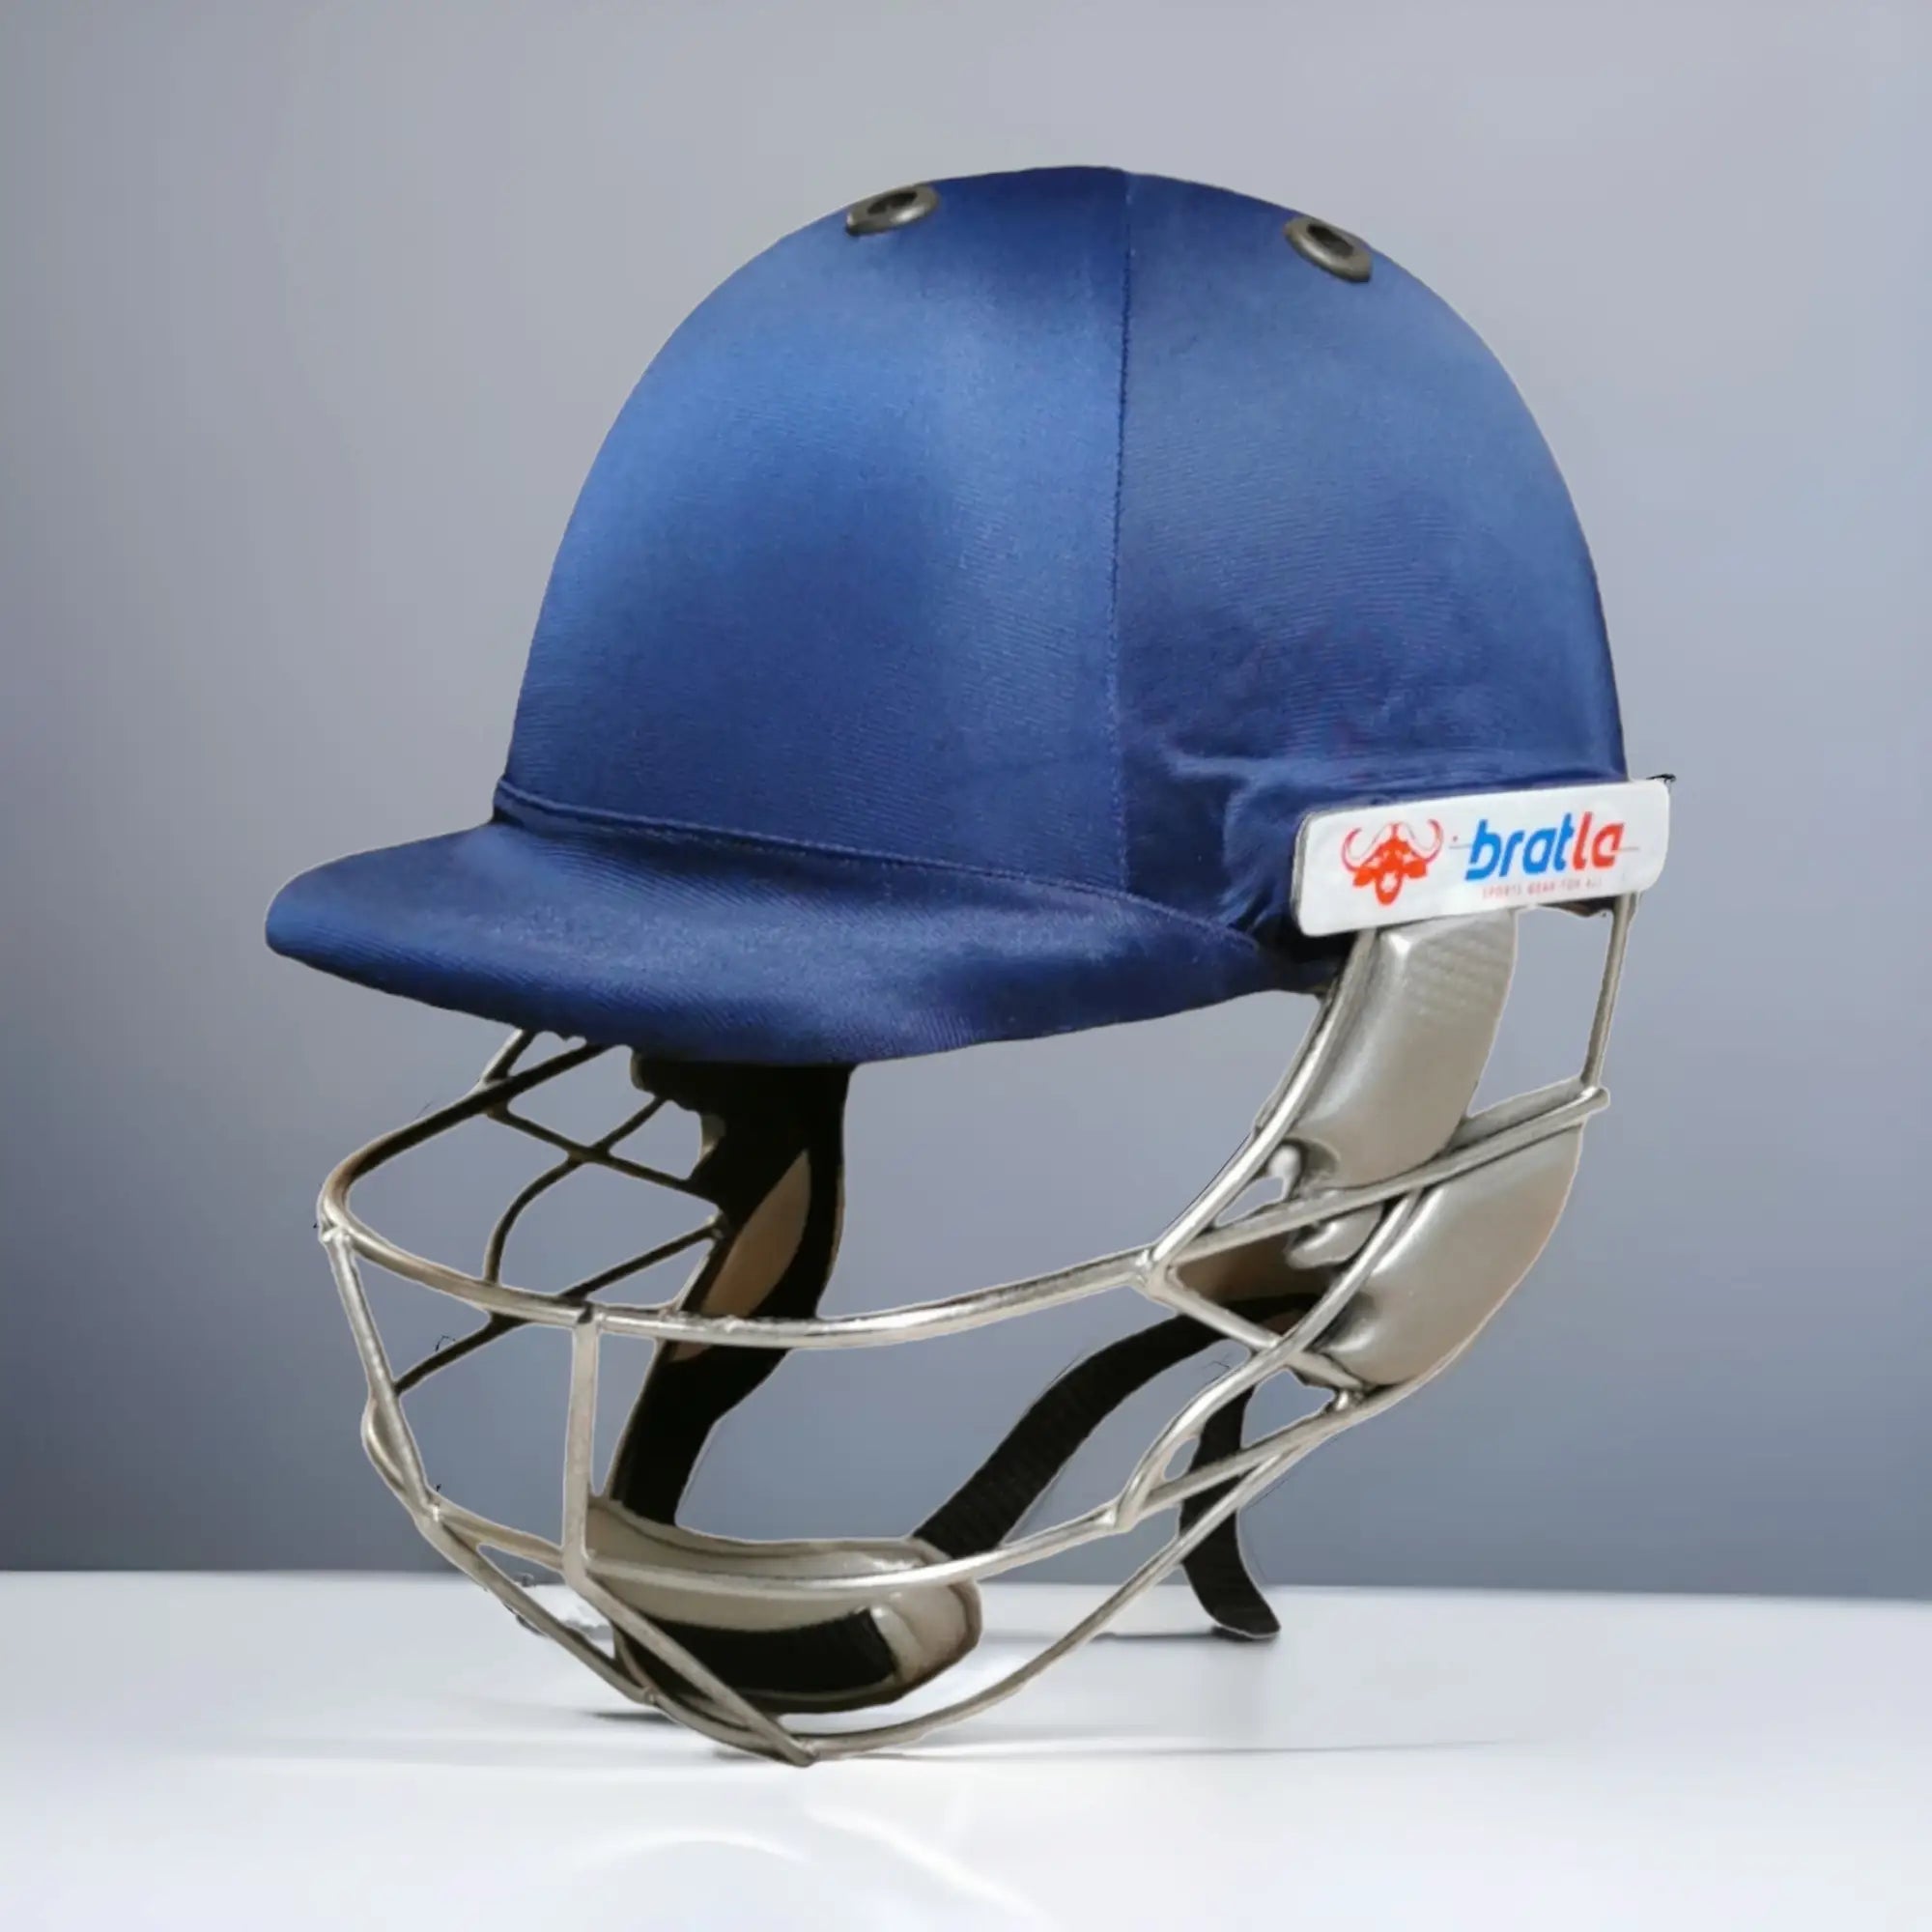 Bratla Pro Cricket Helmet - Navy Blue with Extra Padding Neck Guard and Fixed Grille for Superior Protection and Comfort - HELMETS &